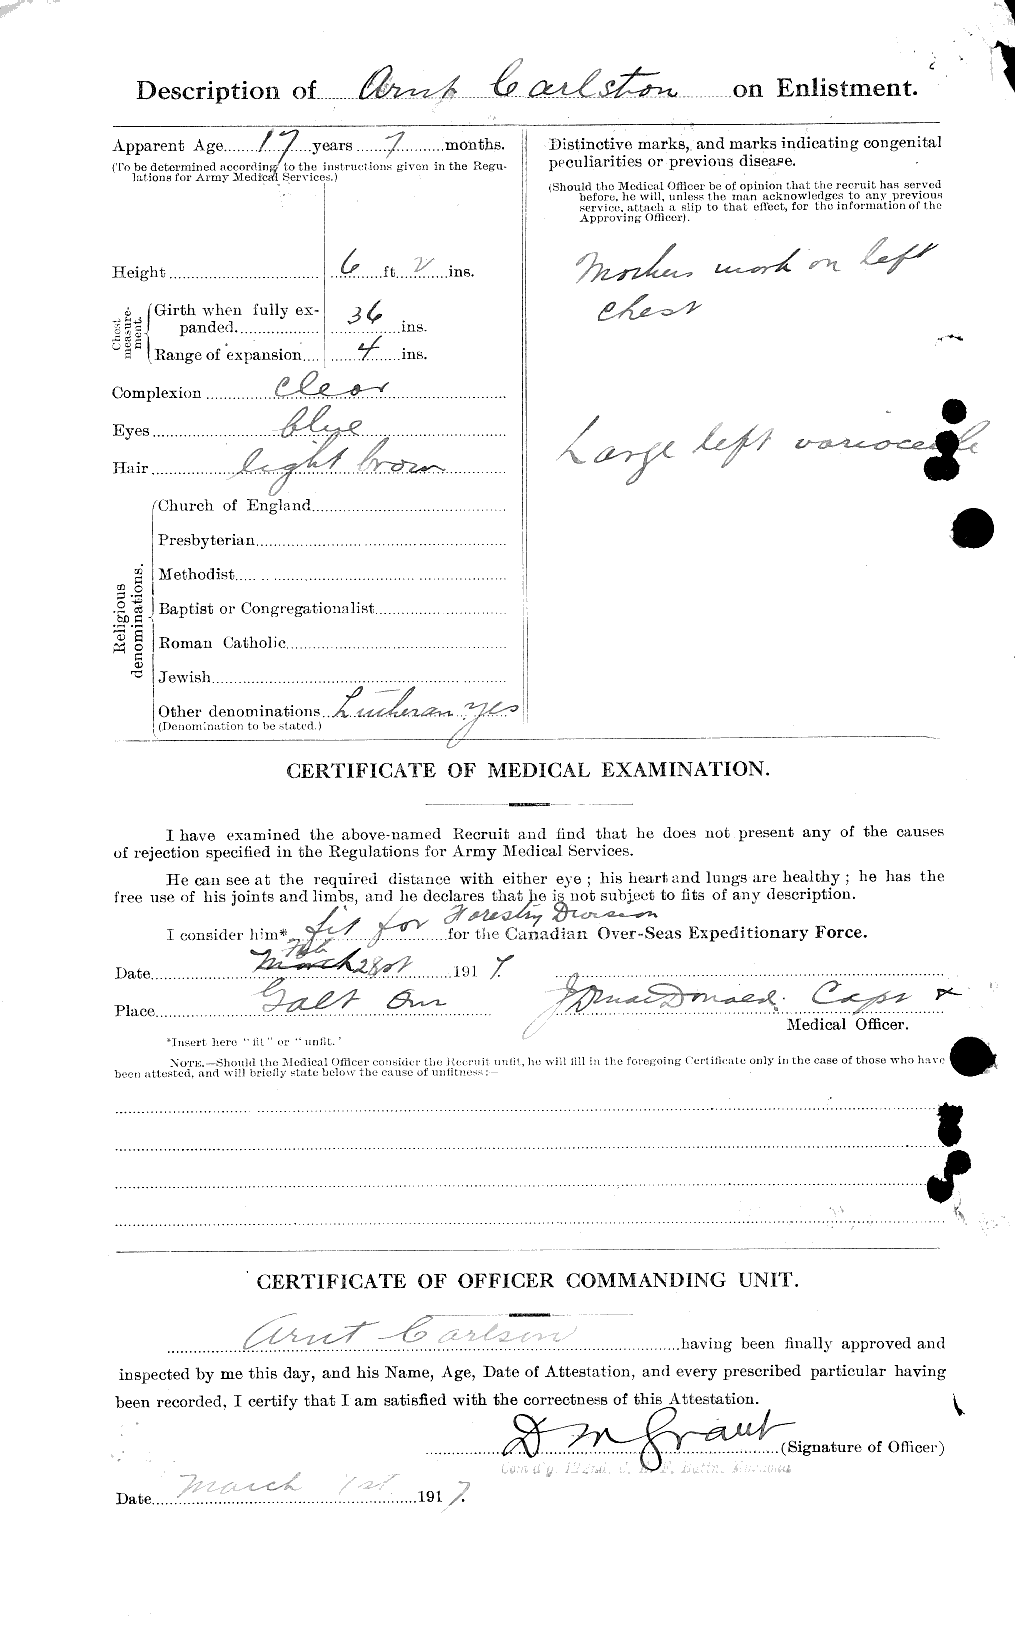 Personnel Records of the First World War - CEF 004481b